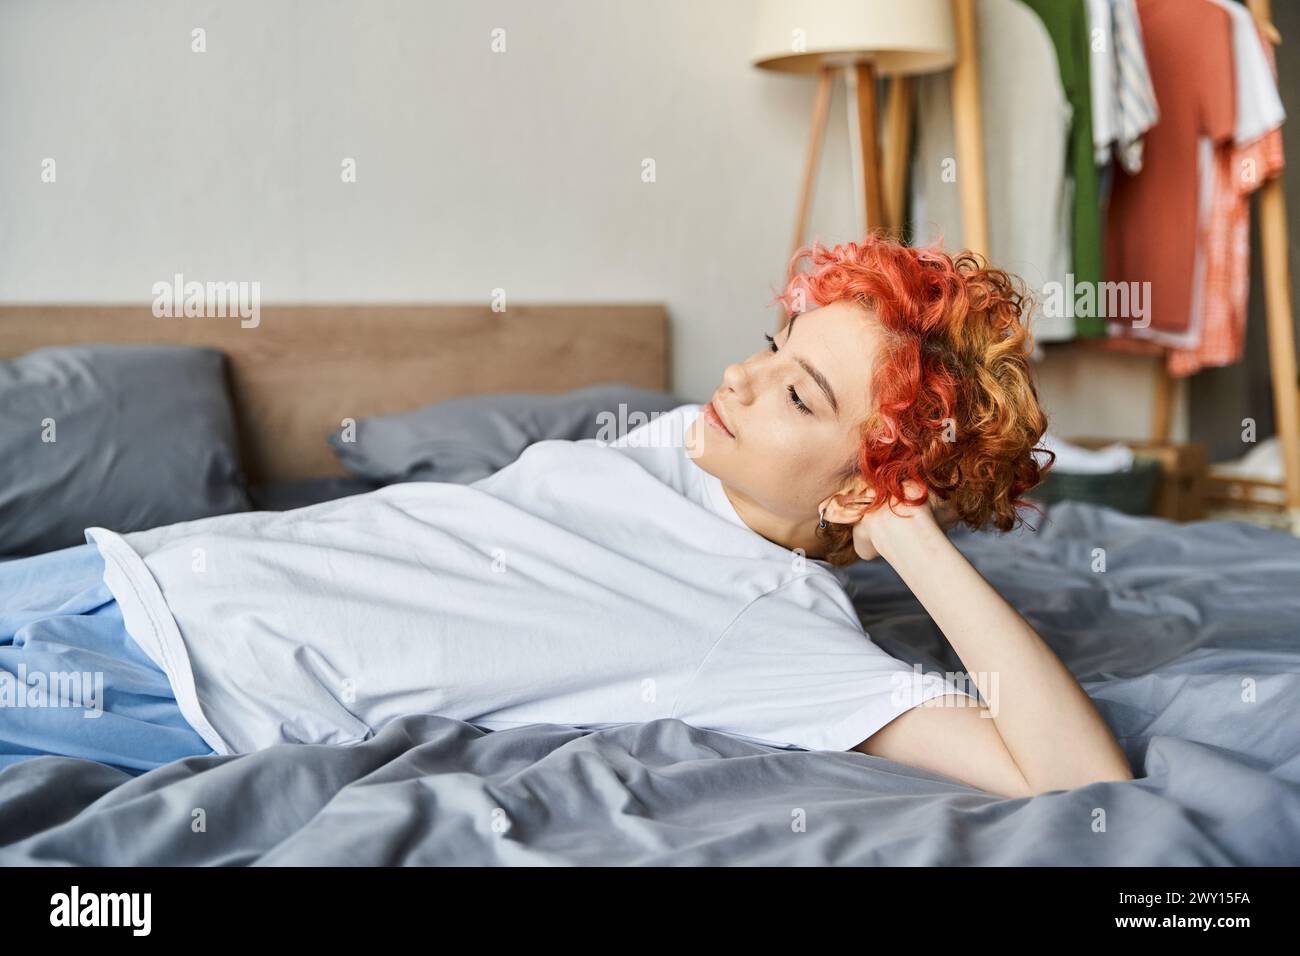 beautiful extravagant person with red vibrant hair lying in her bed and looking away, leisure time Stock Photo